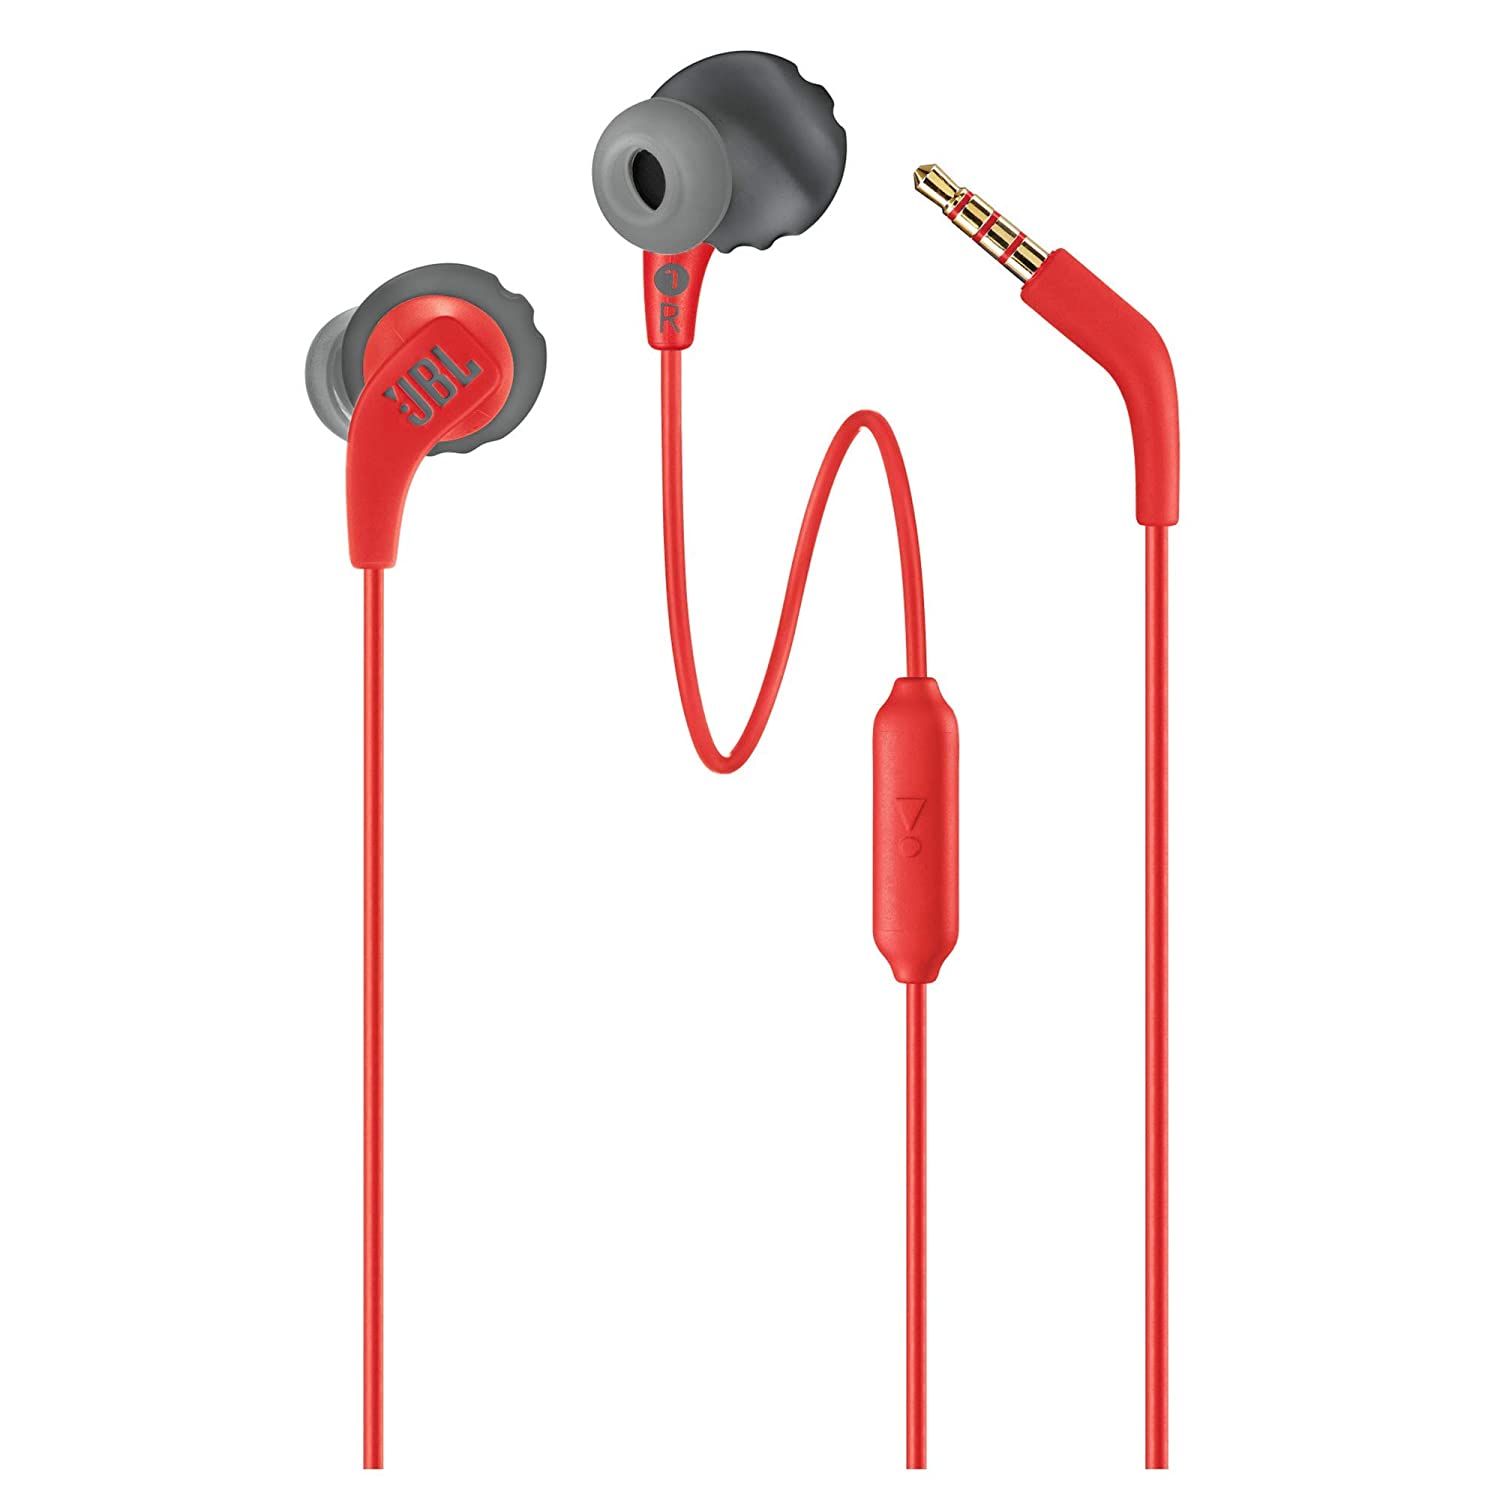 JBL Endurance Run, Sports in Ear Wired Earphones with Mic, Sweatproof, Flexsoft eartips, Magnetic Earbuds, Fliphook & TwistLock Technology with Voice Assistant Support for Mobiles (Red)